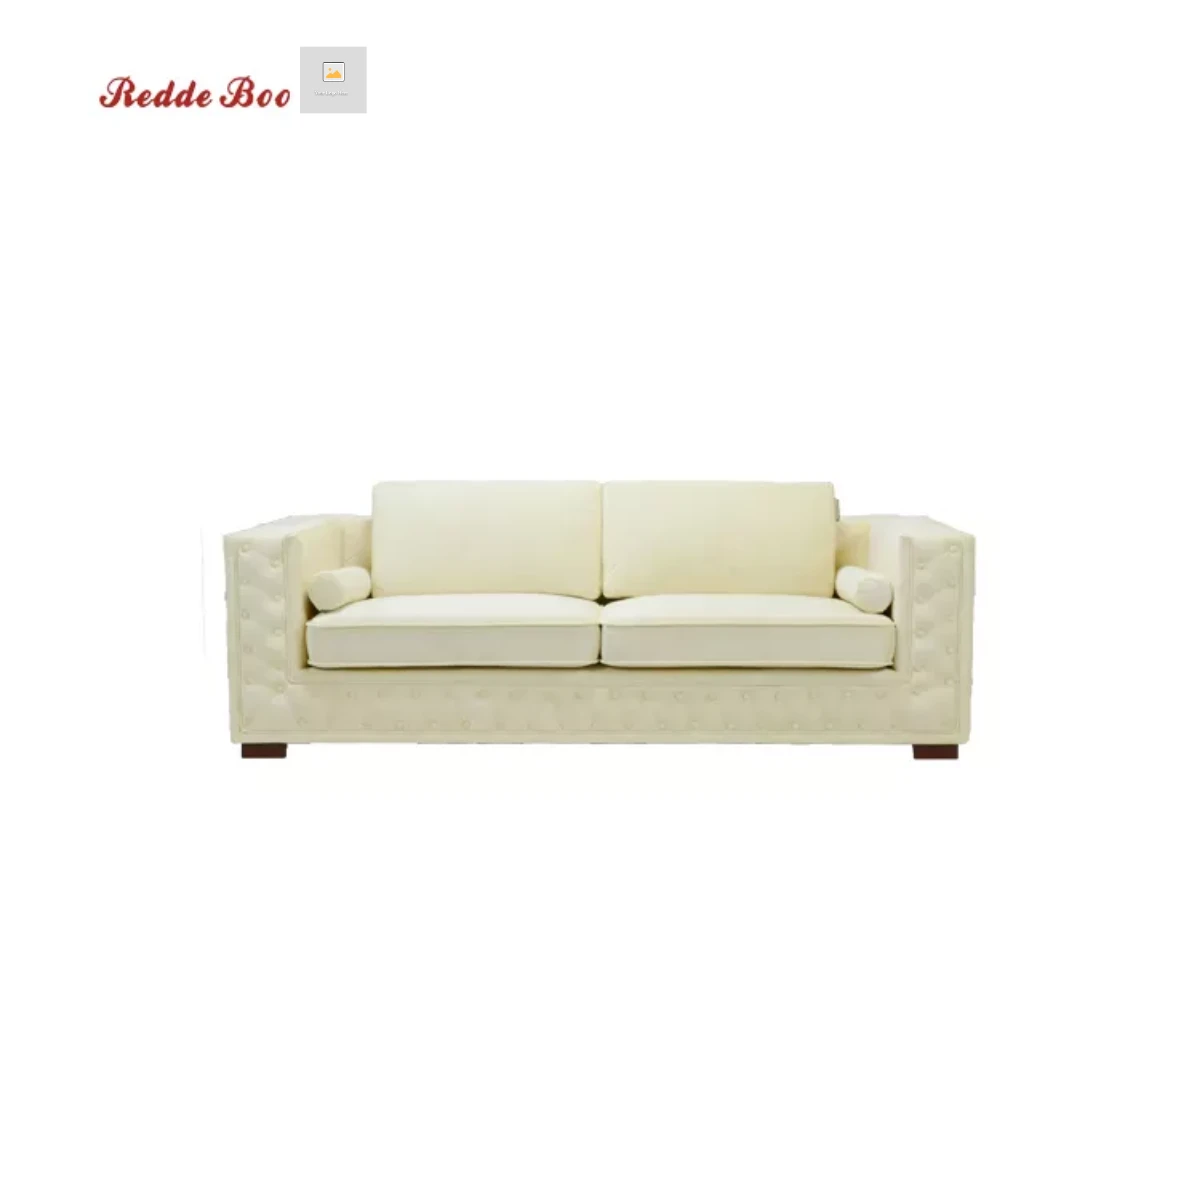 Cheap l shape wholesale sofa furniture for bedroom with price list 7140